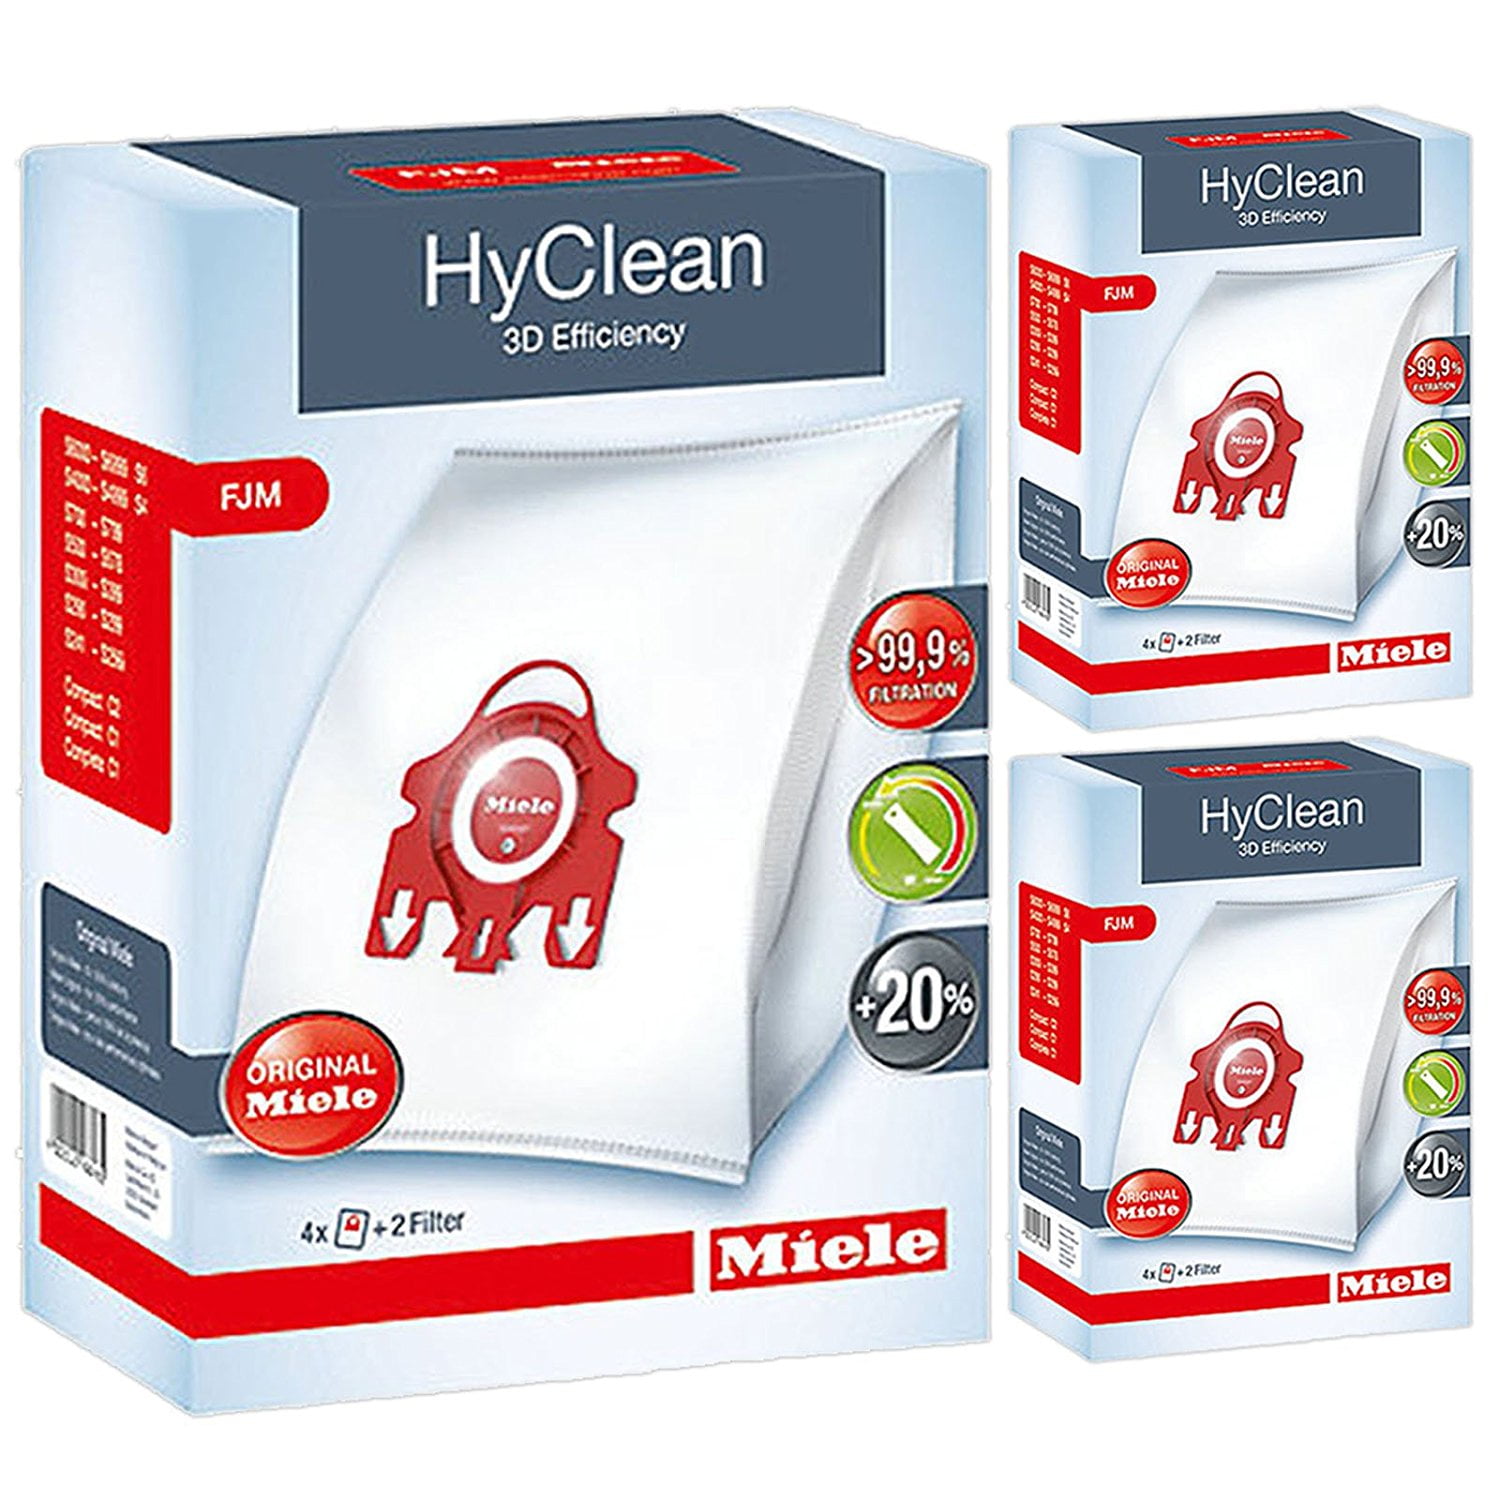 3D Type HyClean FJM Micro Fibre Cleaner Hoover Dust Bags for Miele Vacuum 4 PACK 